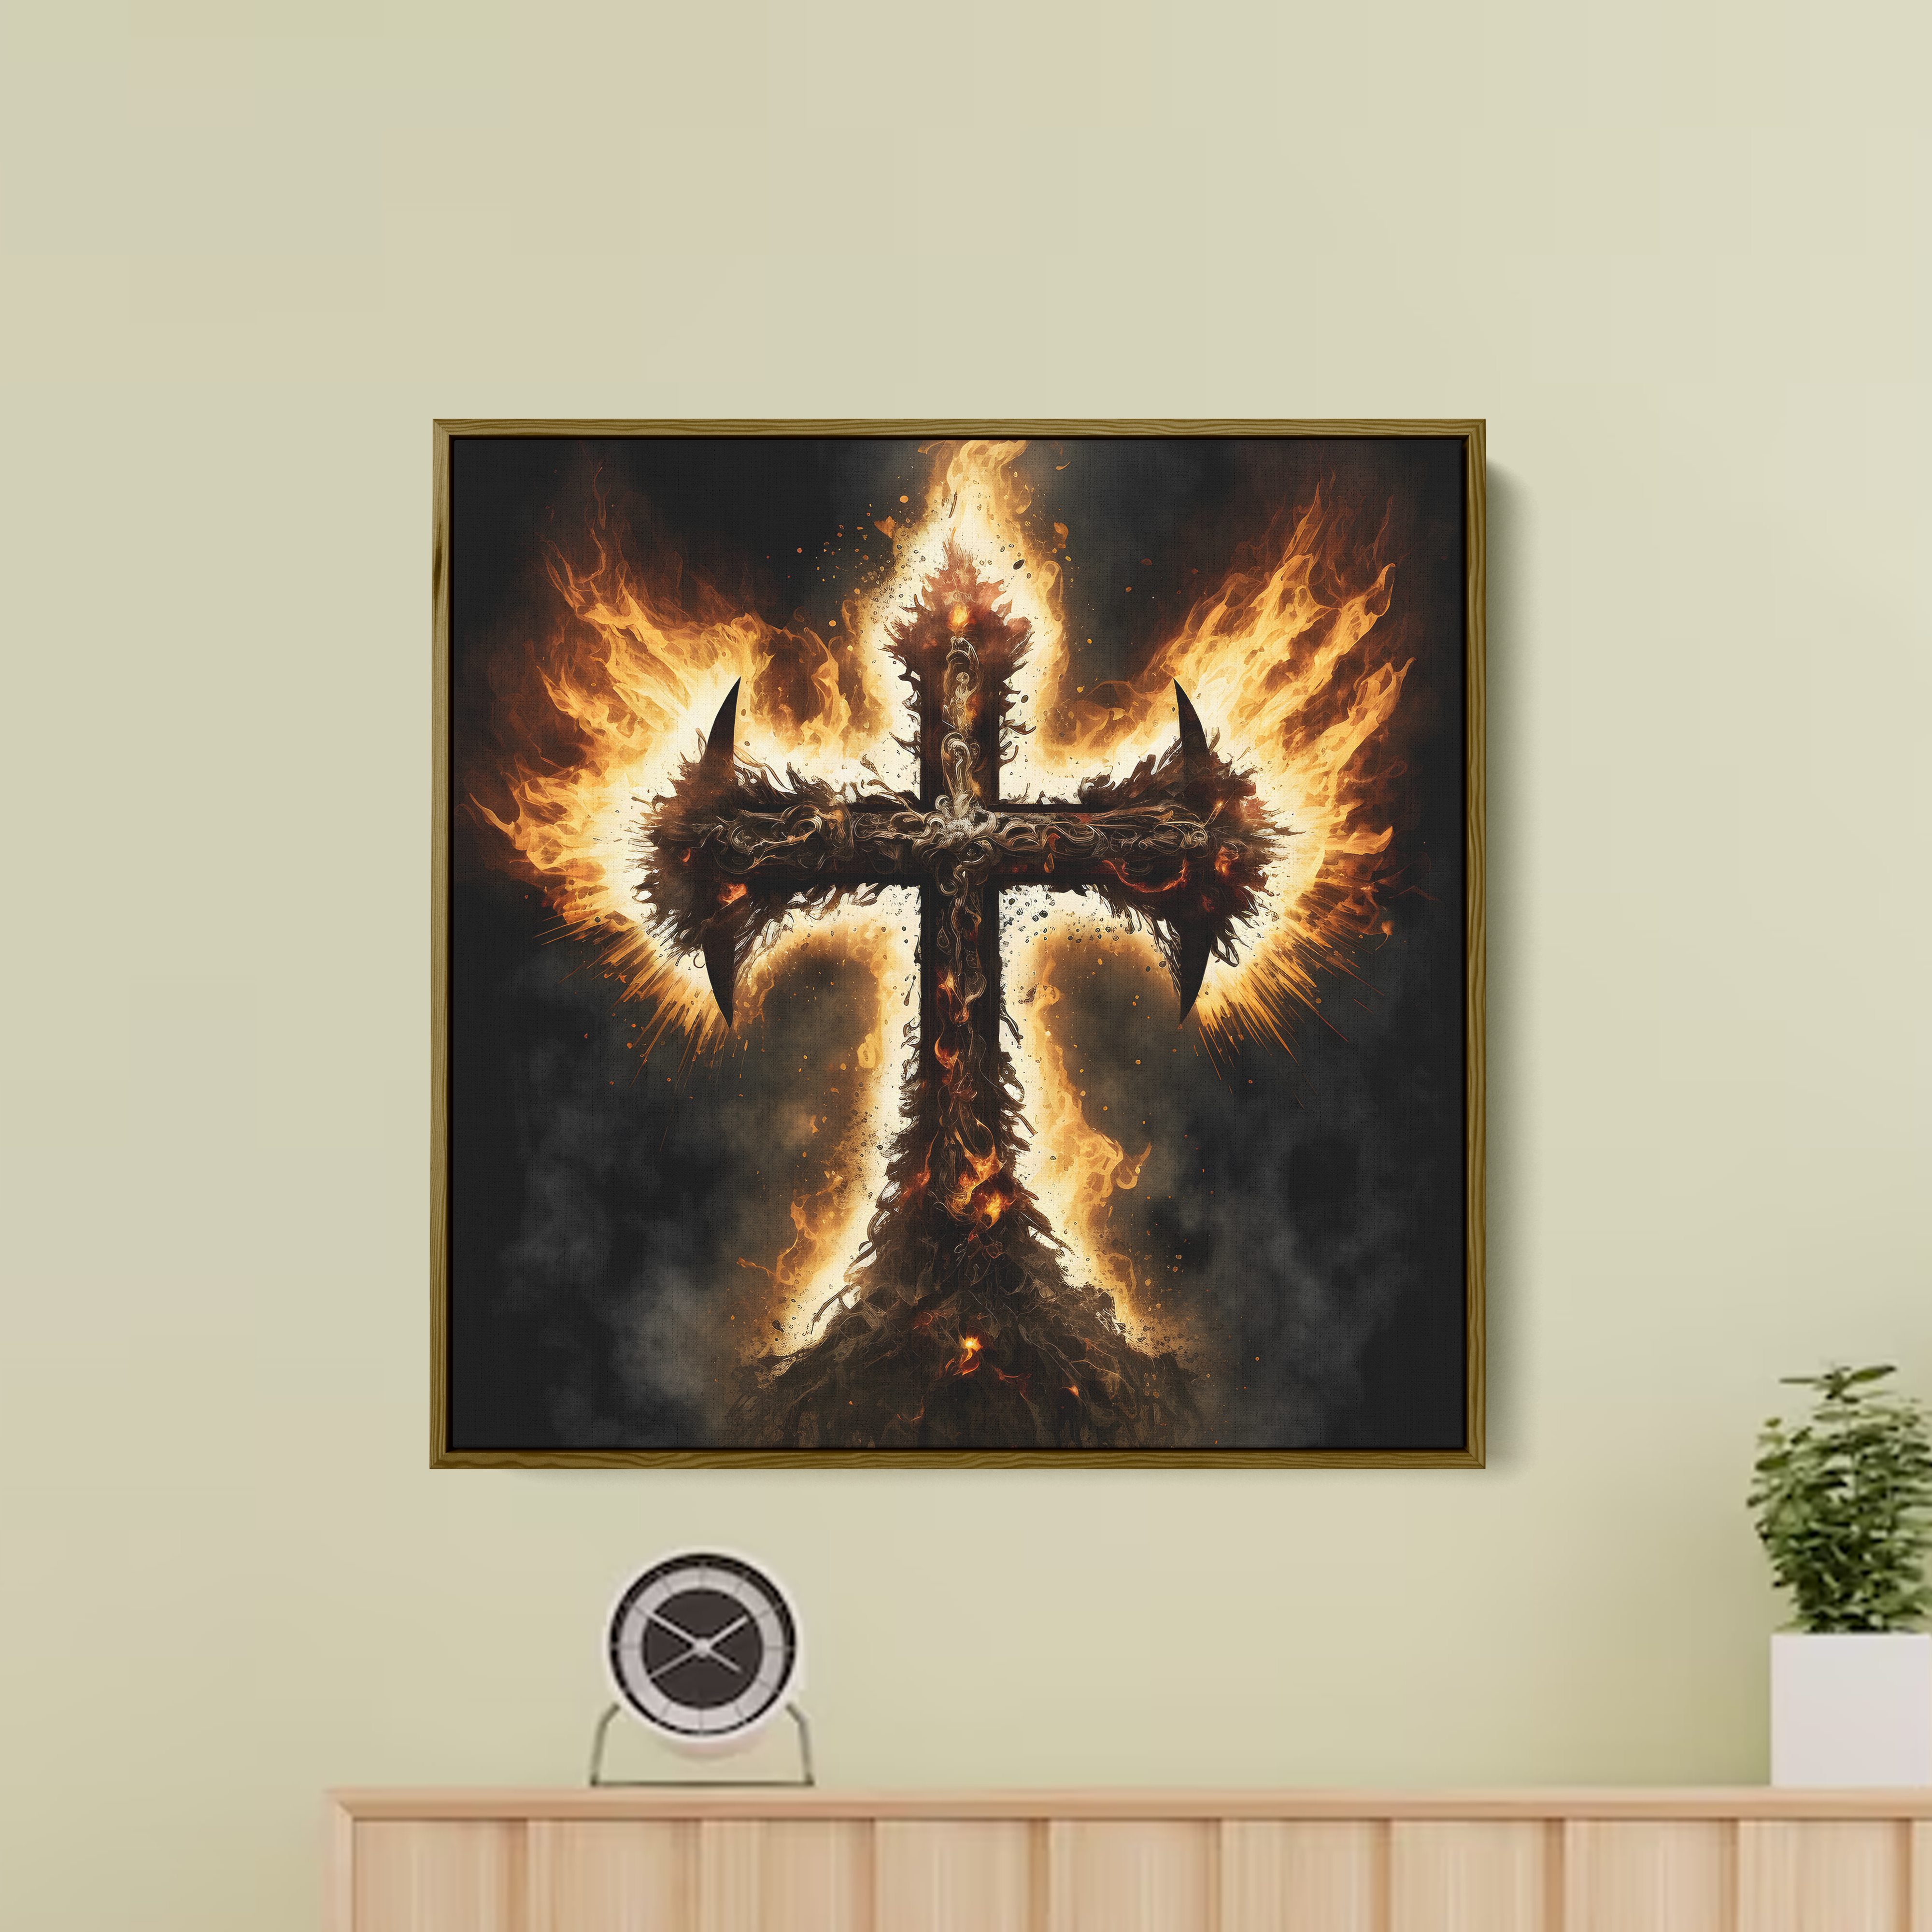 The Fire Jesus Cross Canvas Wall Painting